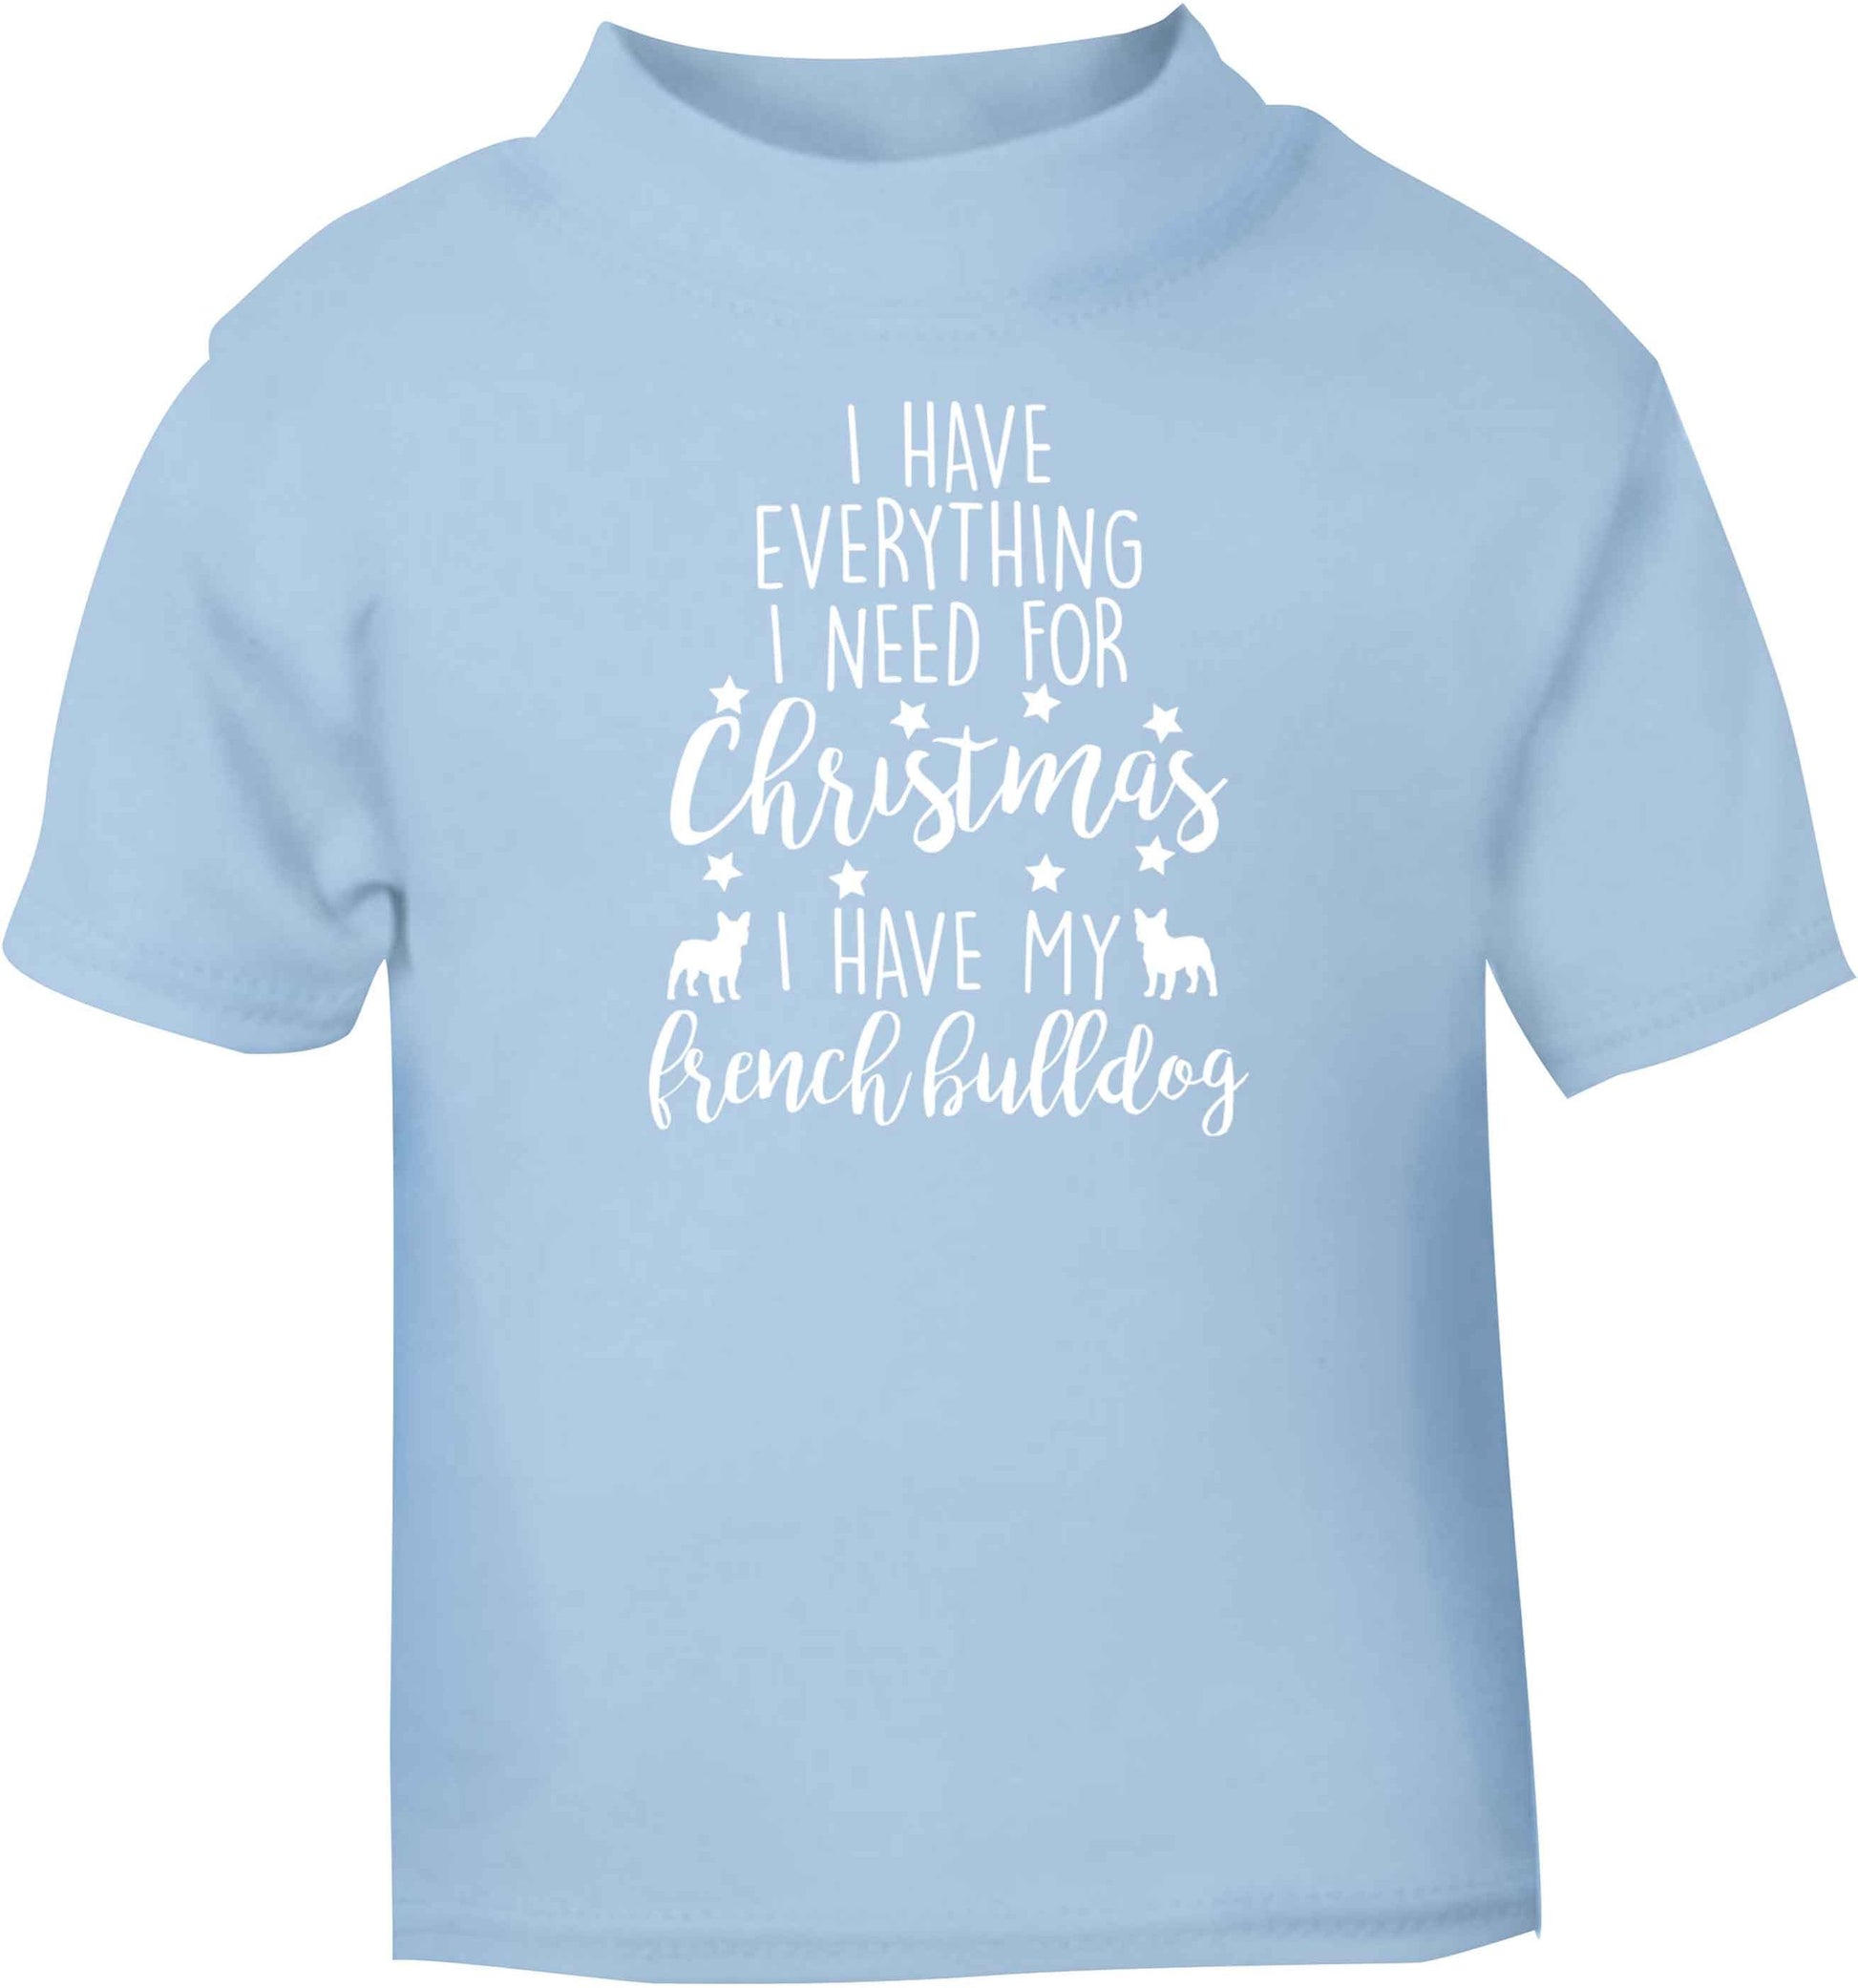 I have everything I need for Christmas I have my french bulldog light blue baby toddler Tshirt 2 Years